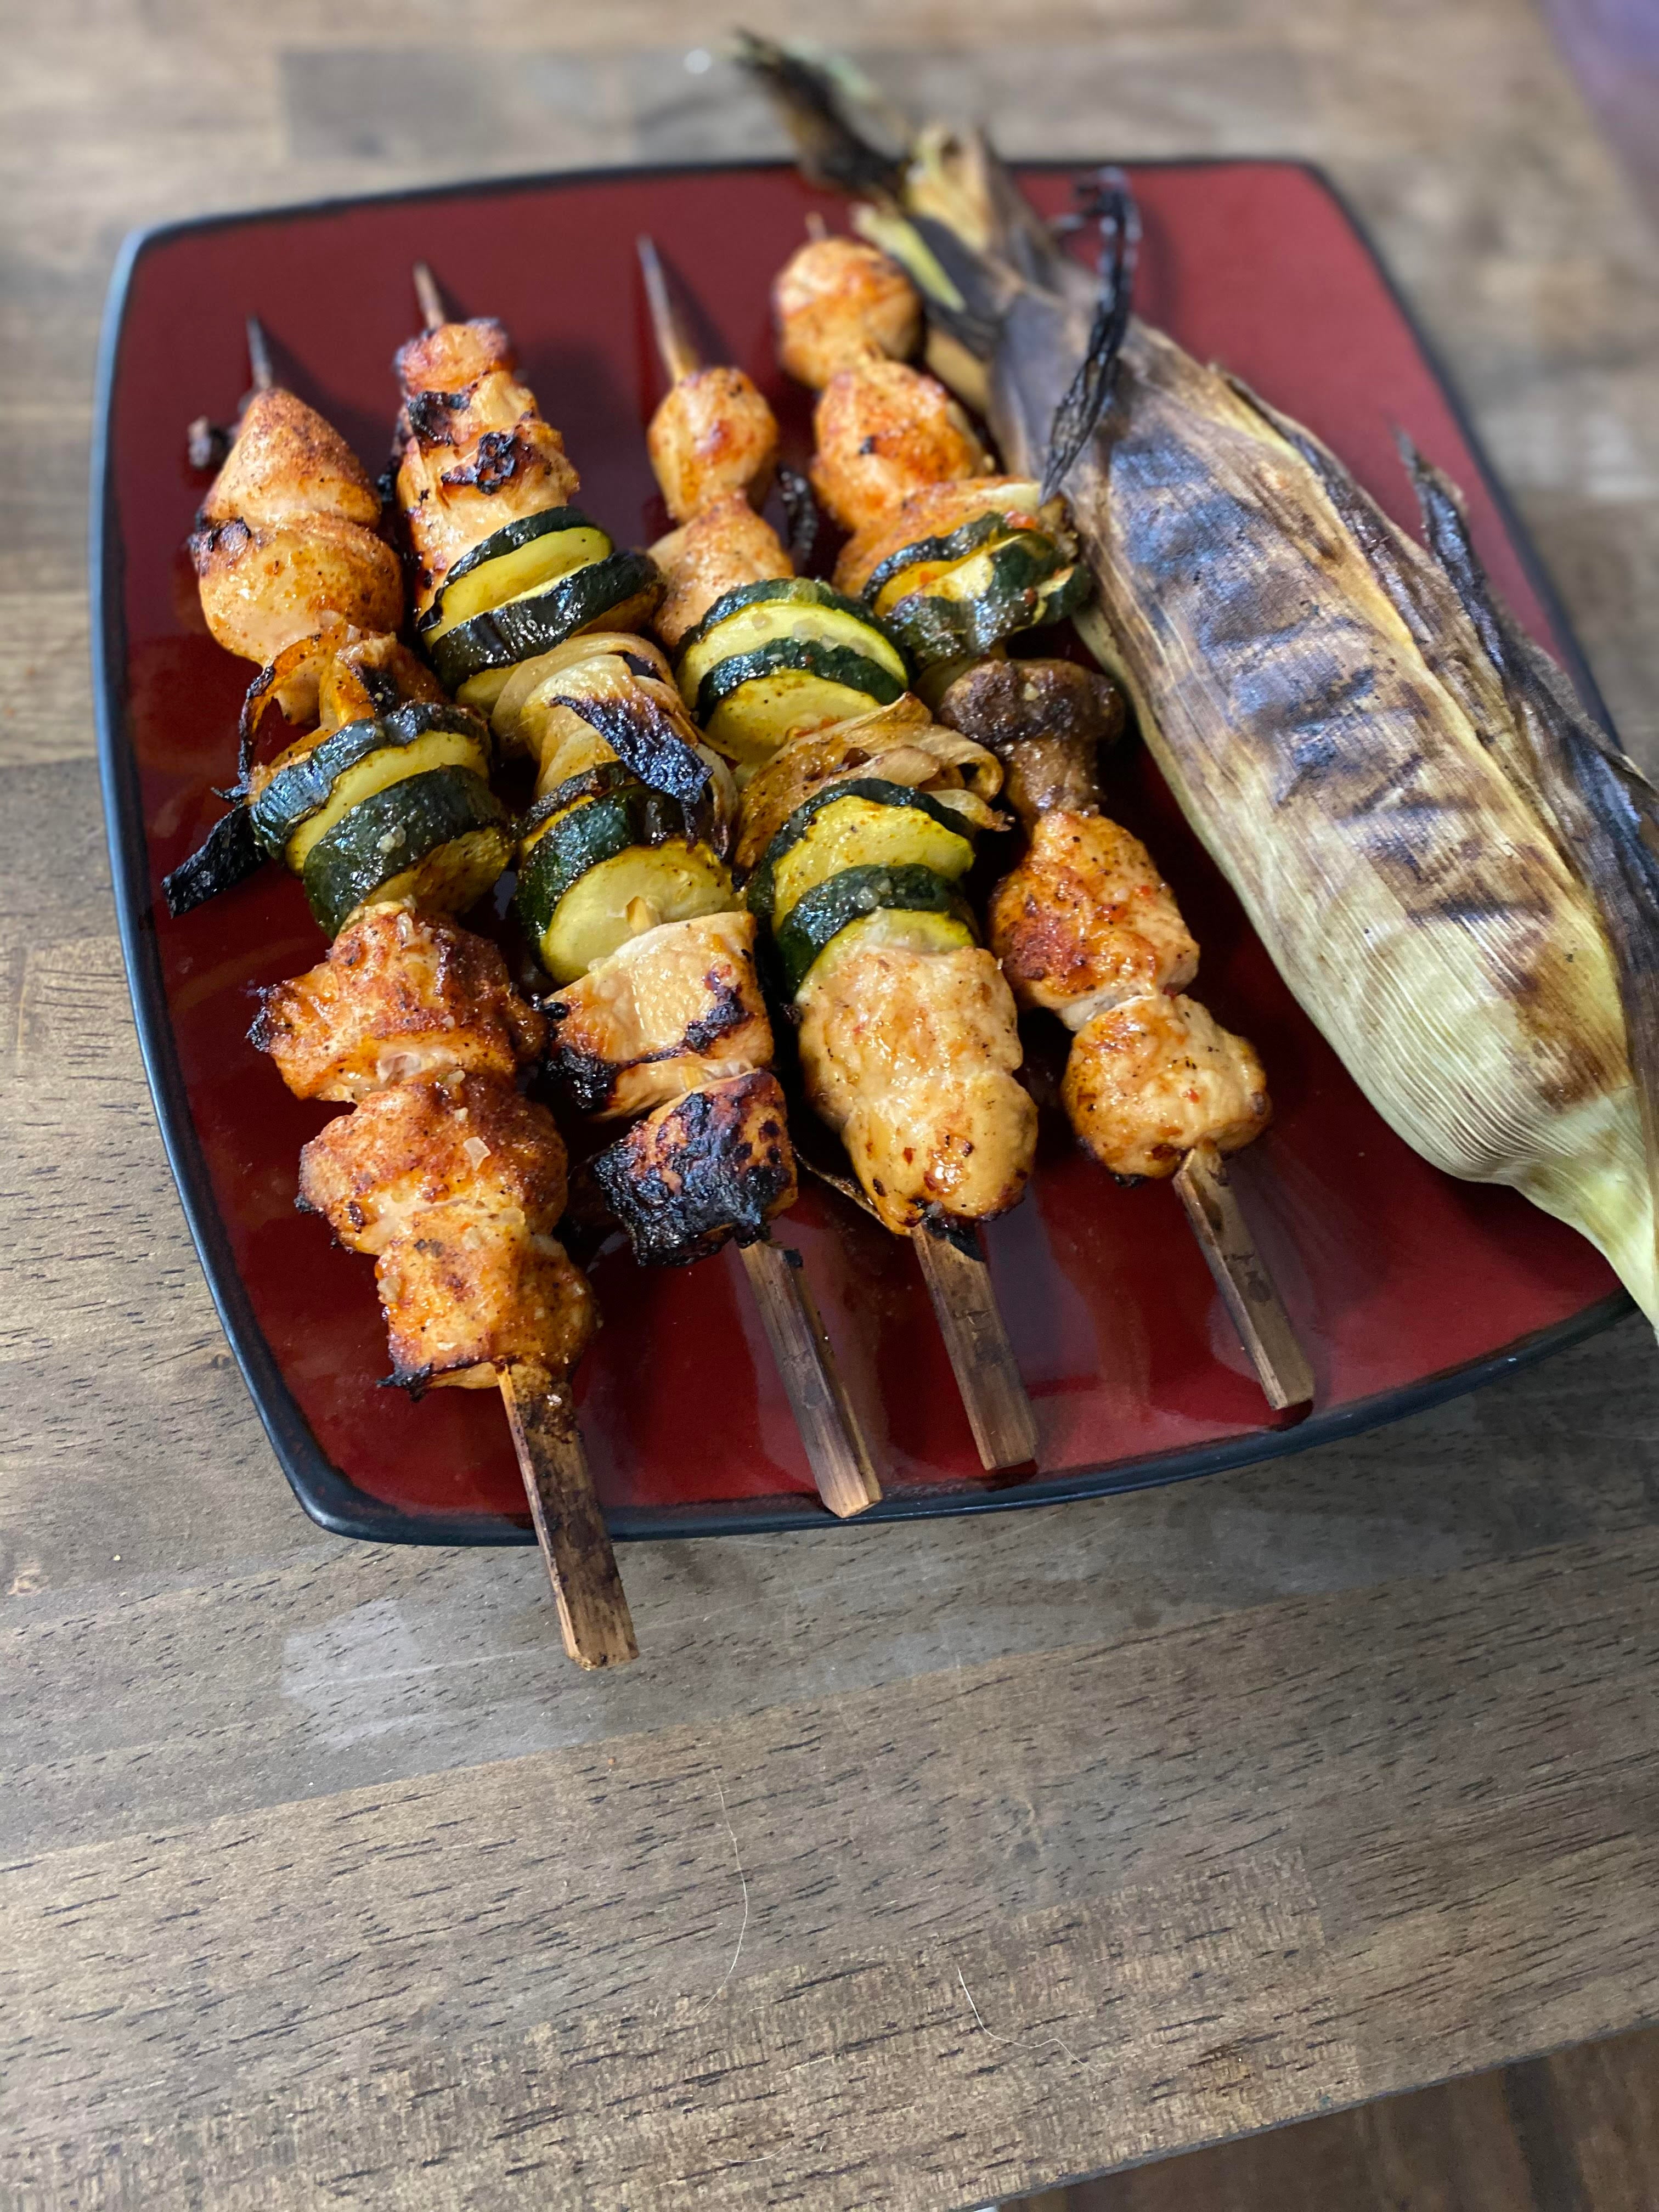 The Best Smoked or Grilled Corn You've EVER Had!